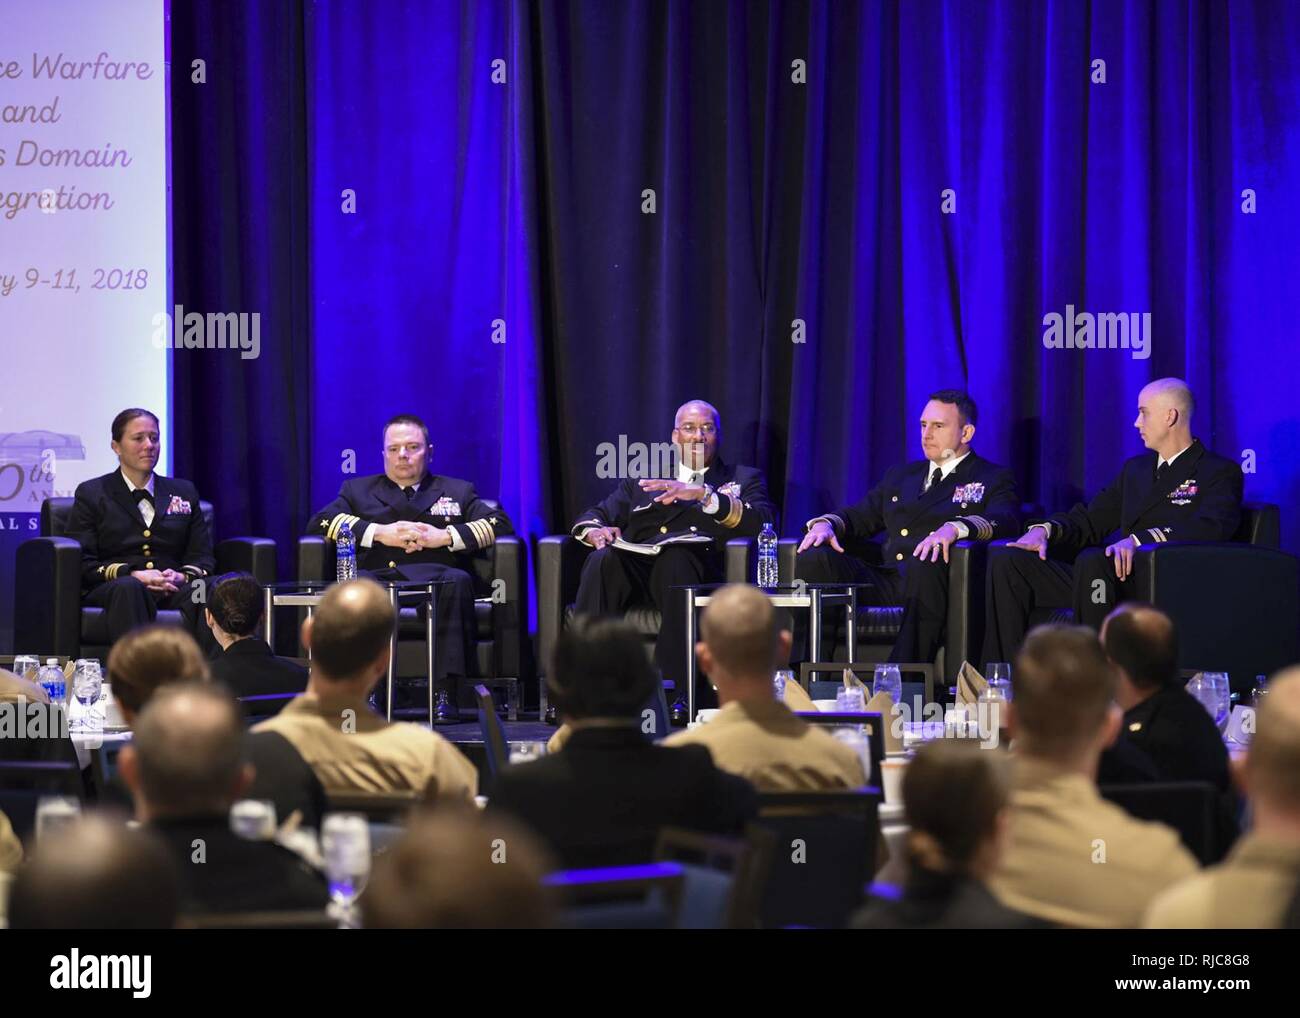 CRYSTAL CITY, Va. (Jan. 09, 2018) Rear Adm. Jesse A. Wilson Jr., commander, Naval Surface Force Atlantic, middle, Capt. Scott Robertson, commander, Surface Warfare Officer School, middle right, and Capt. Rick Cheeseman, head, Surface Officer Distribution Division, middle left, speak to officers during a junior officer roundtable discussion at the Surface Navy Association’s 30th National Symposium. Also serving as a panelist are Lt. Cmdr. Katie Whitman, left, and Lt. James Lewis, right.  This year's symposium focuses on 'Surface Forces and Cross-Domain Integration,' highlighting common procedur Stock Photo